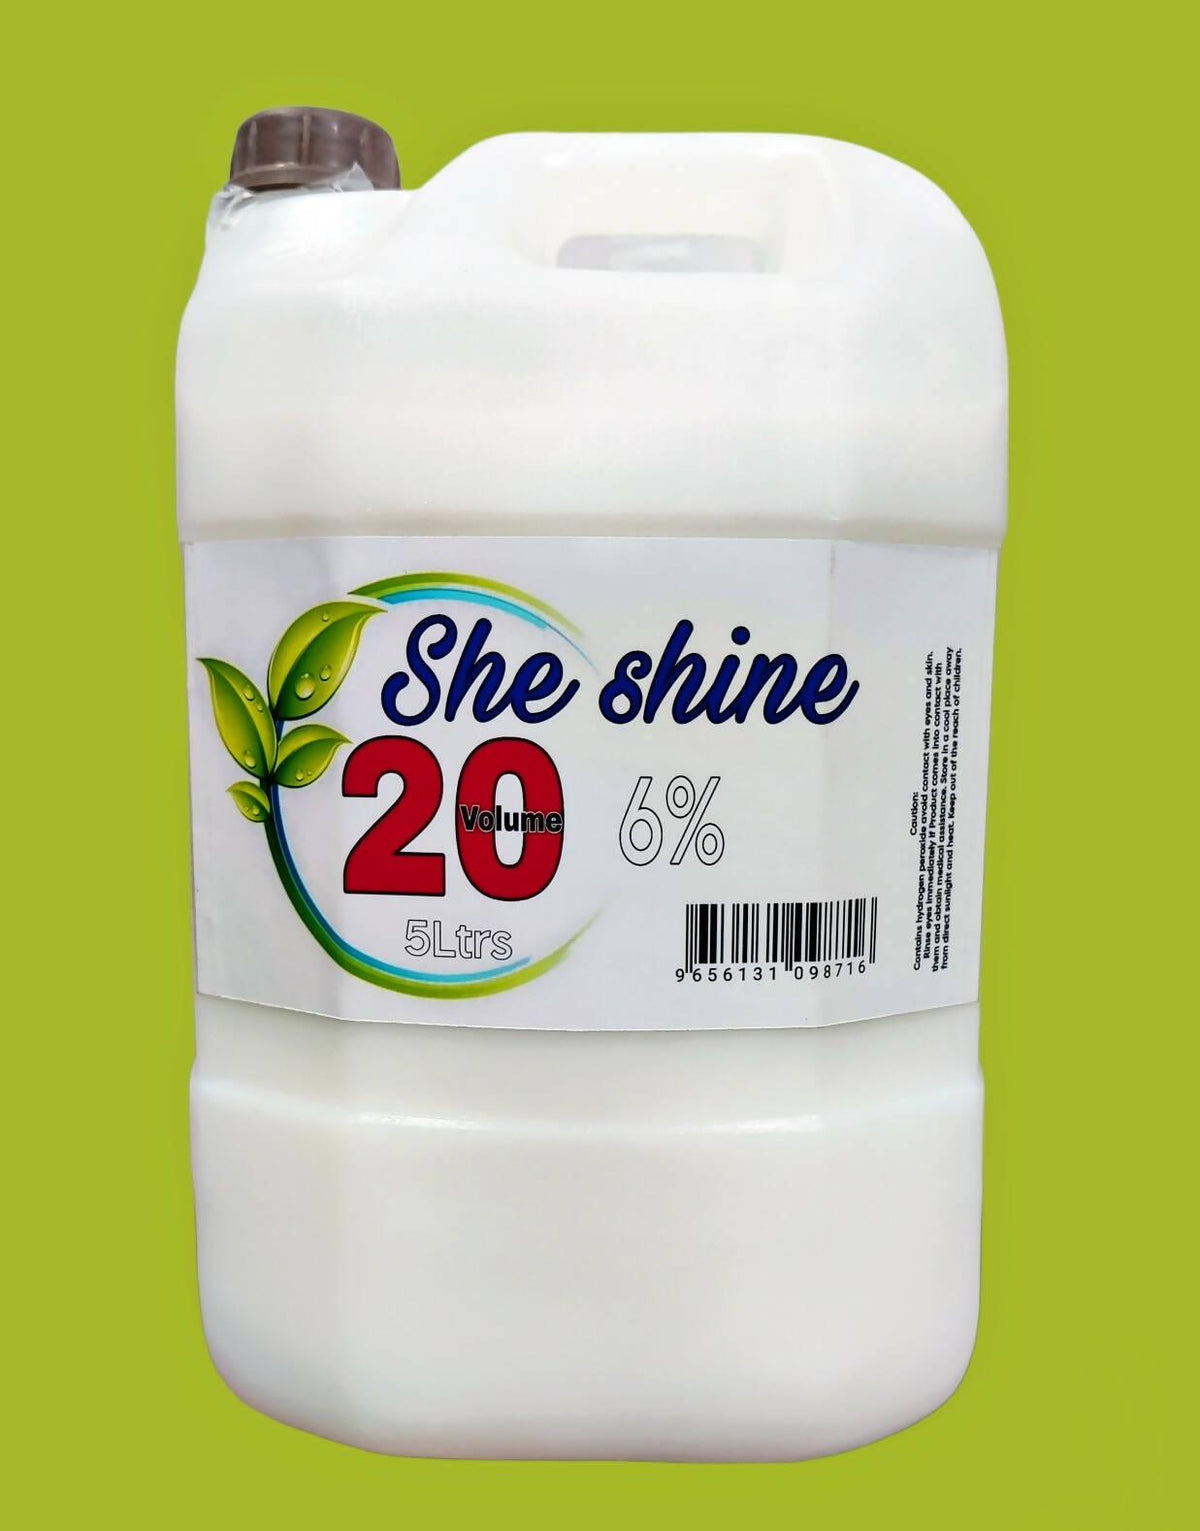 She Shine Volume 20 ( 5 Litters Can) - ValueBox